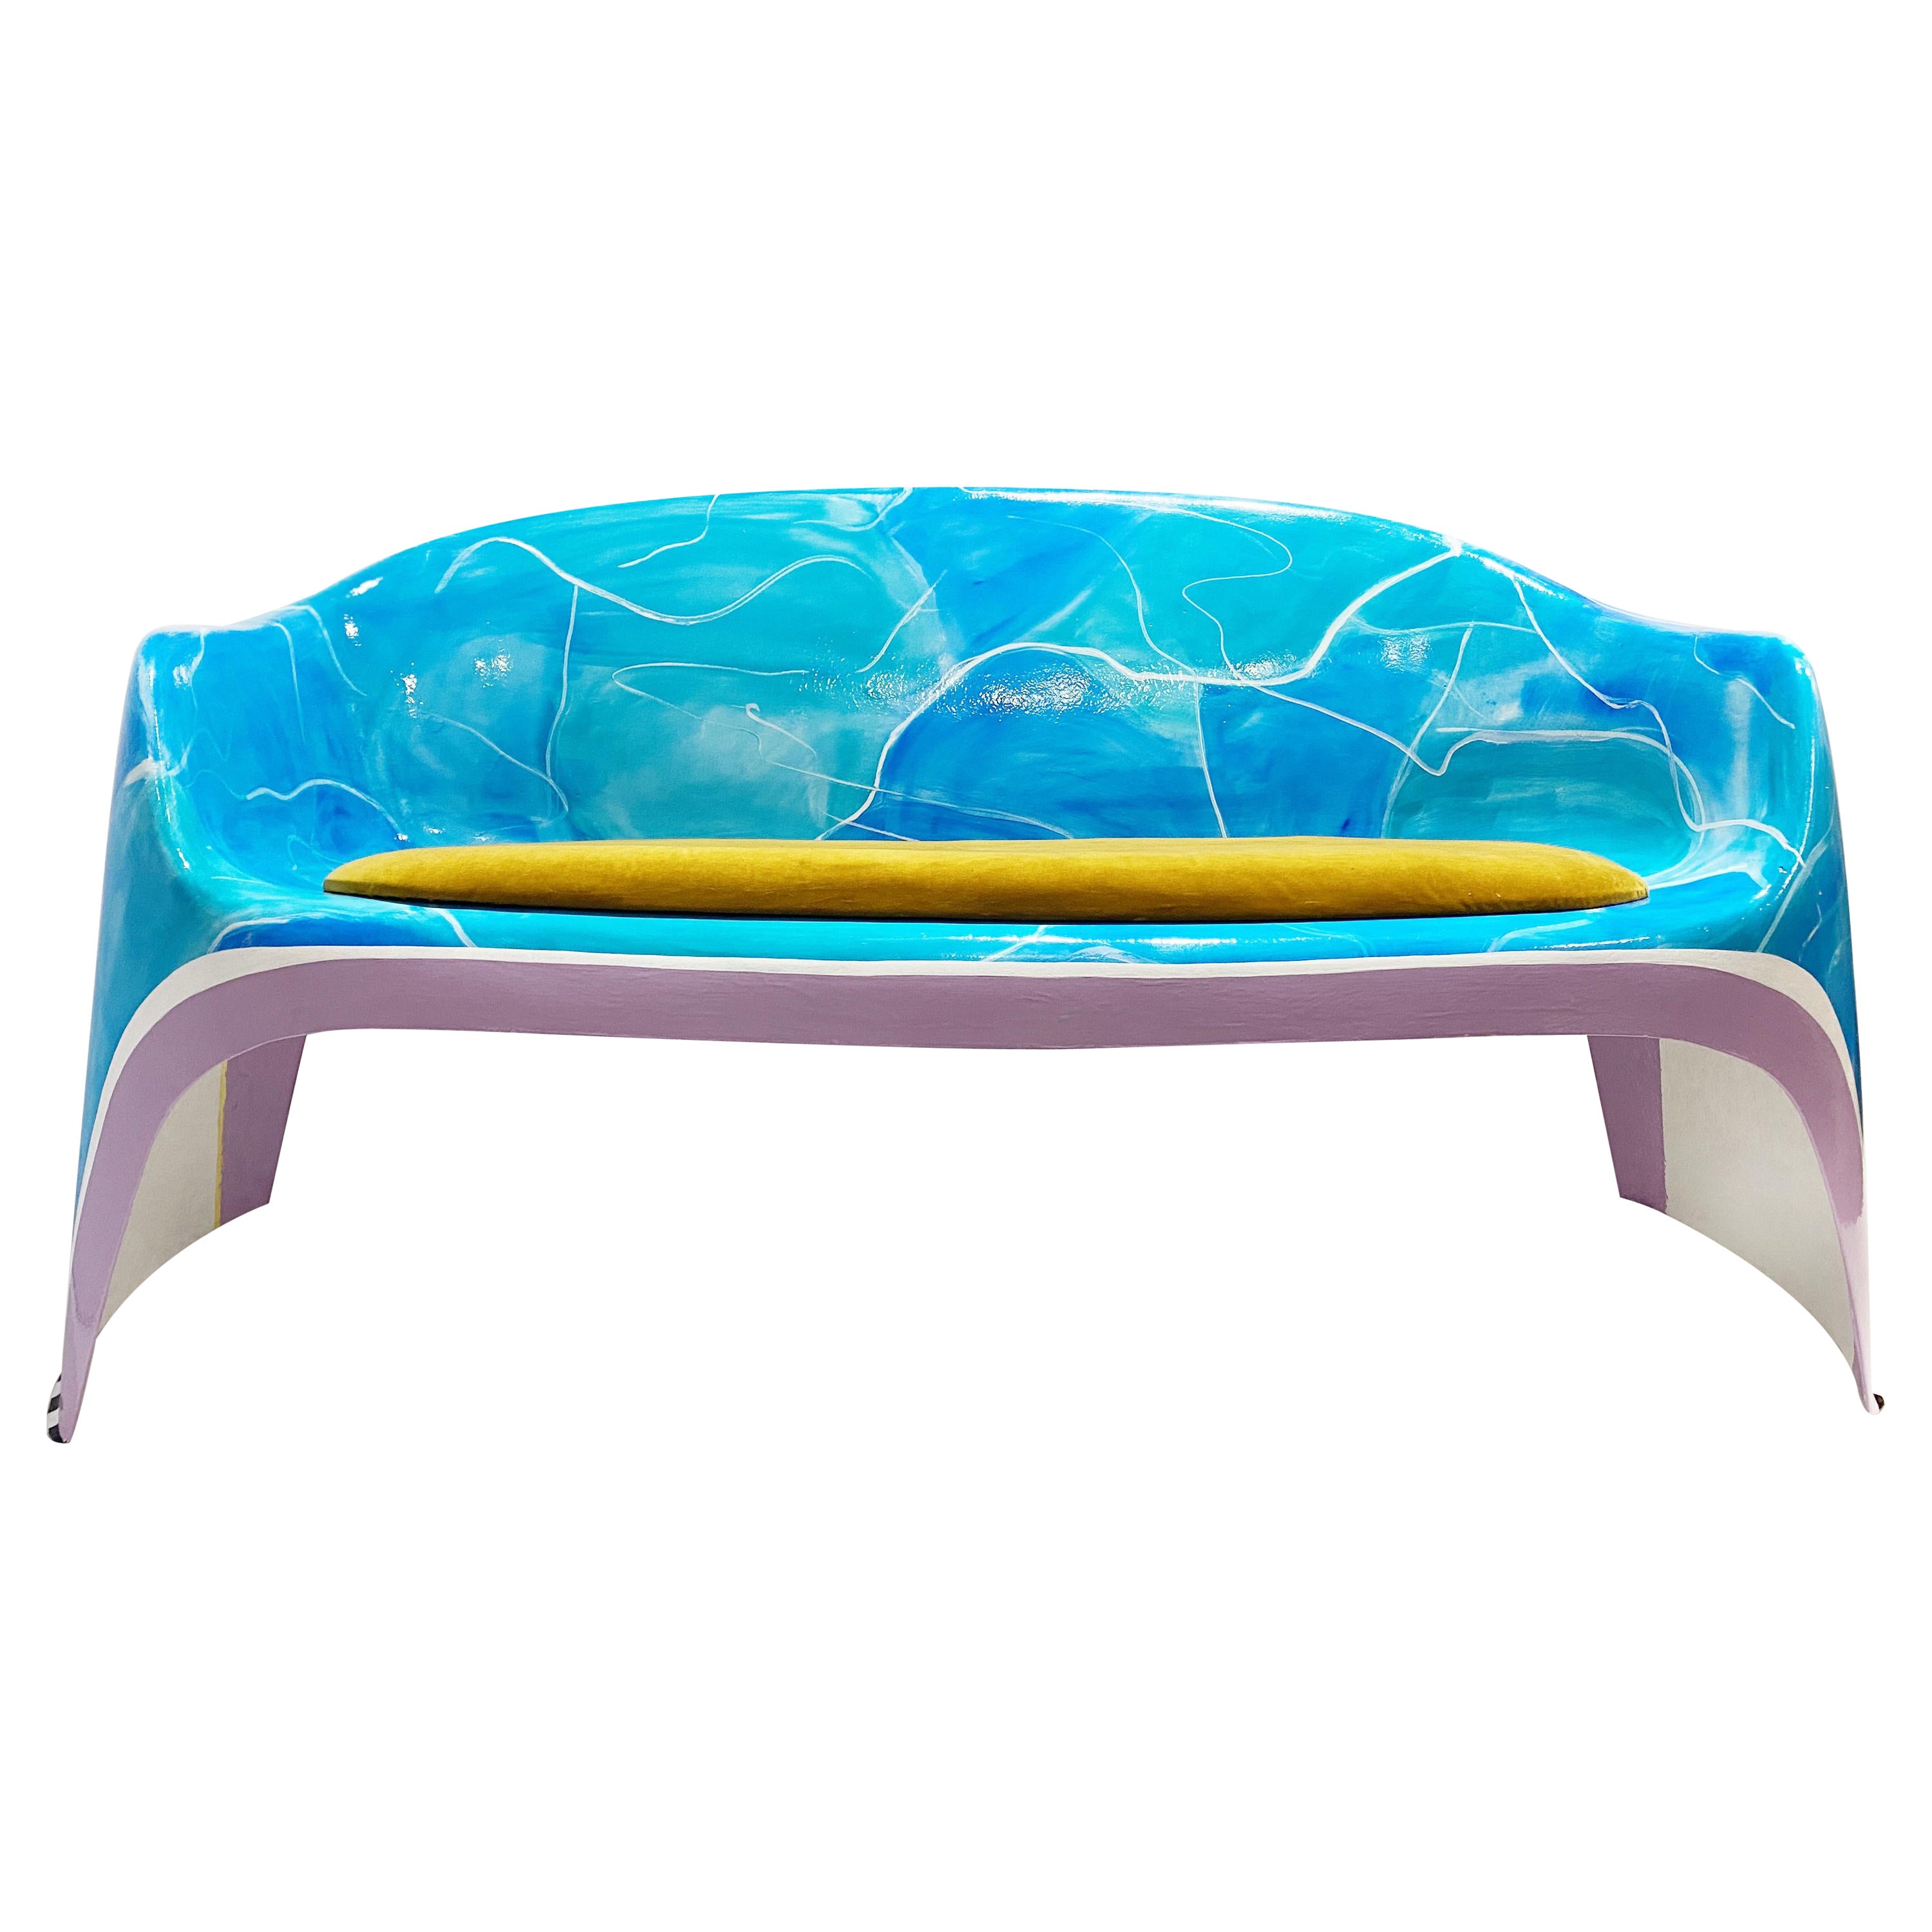 ELEMENT 00002 Swimming Bench 3 For Sale